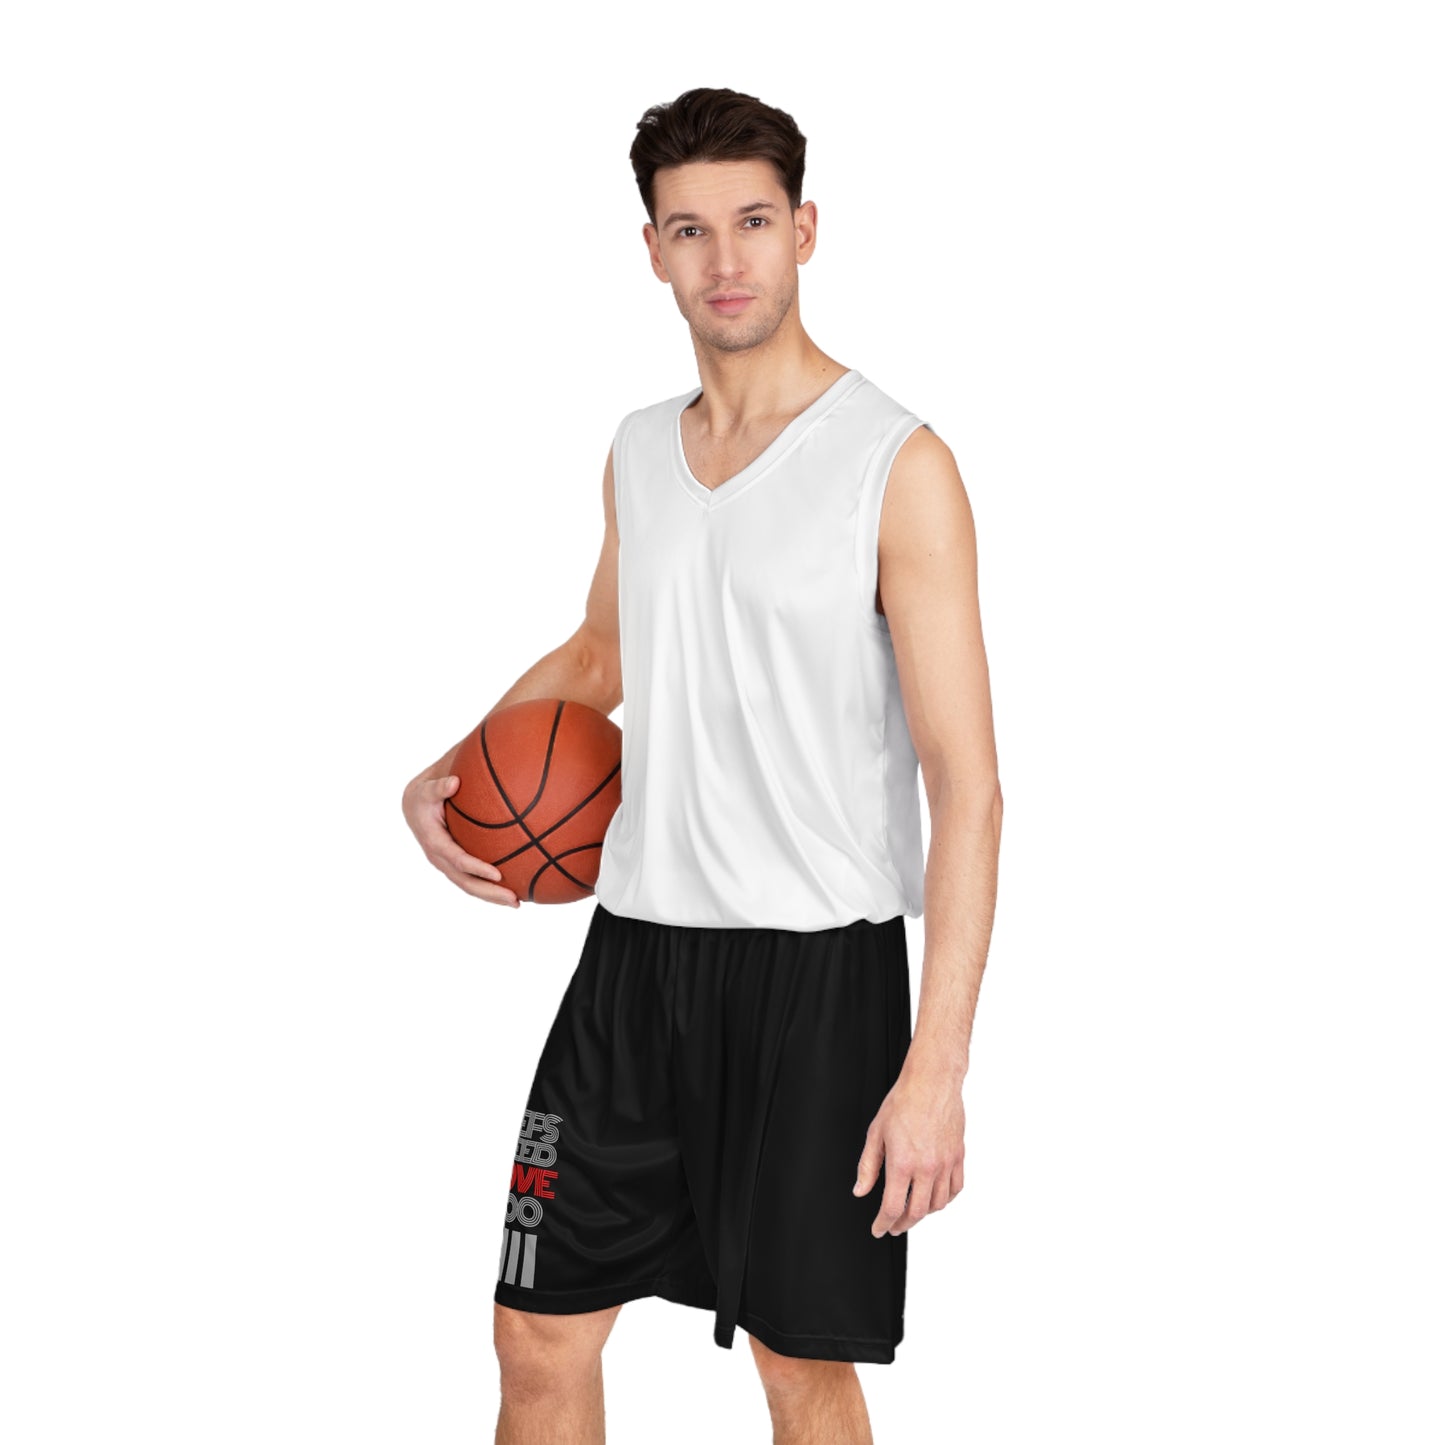 Refs Need Love Too Basketball Shorts for Rec games | Moisture Wicking Shorts | No Pockets | Black shorts only | Referee gifts | Gifts for Refs | For Basketball officials